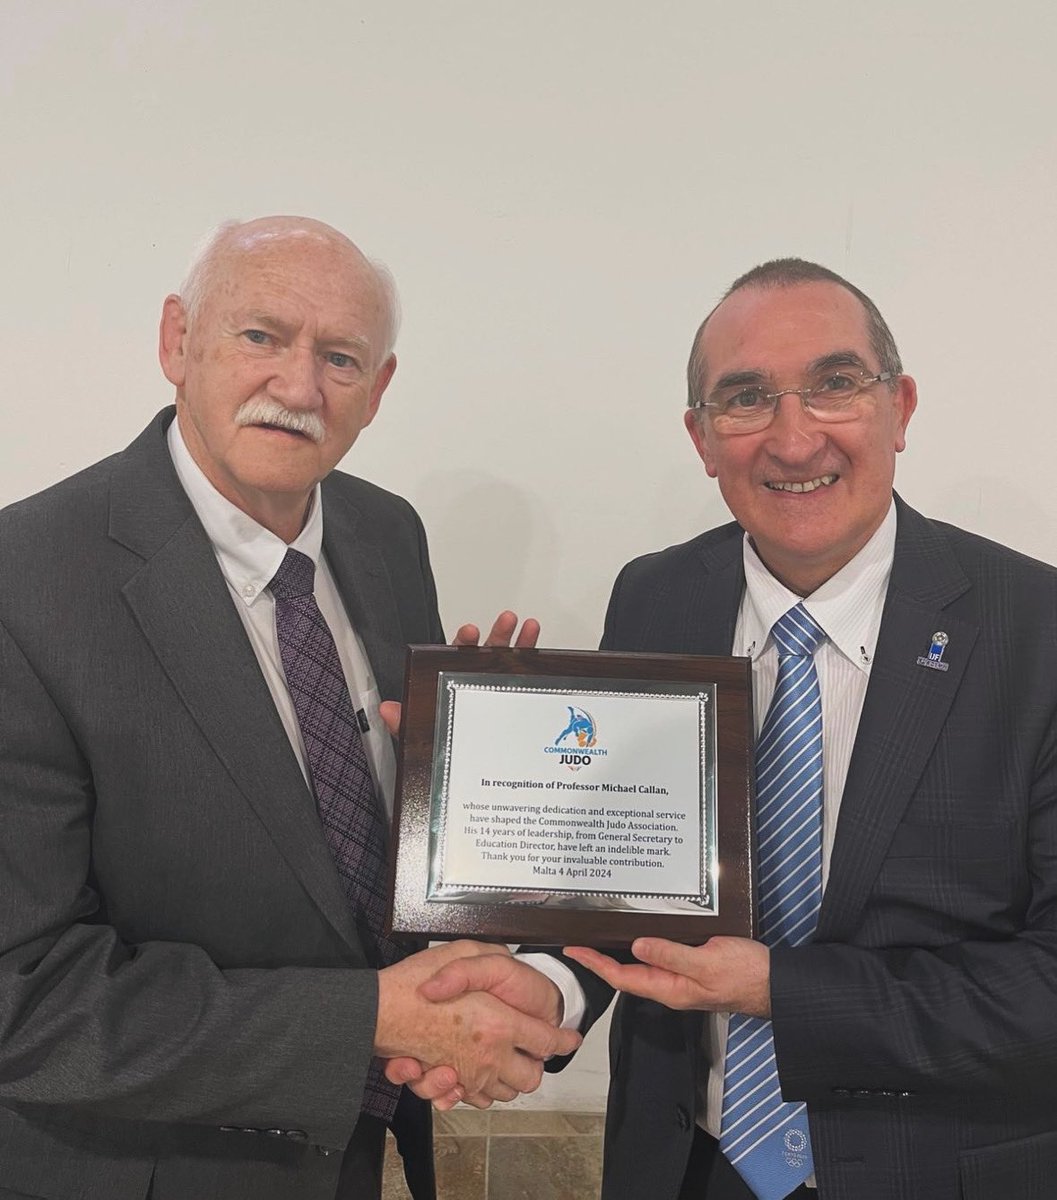 A massive congratulations to Professor Mike Callan @Judospace for his special recognition award from the Commonwealth Judo Association. Here’s Mike being presented his award by the CJA President Mr Rick Kenney OBE 👏🎉 @uniofhertslms @UniofHerts @UniofHertsIoS #judoeducation